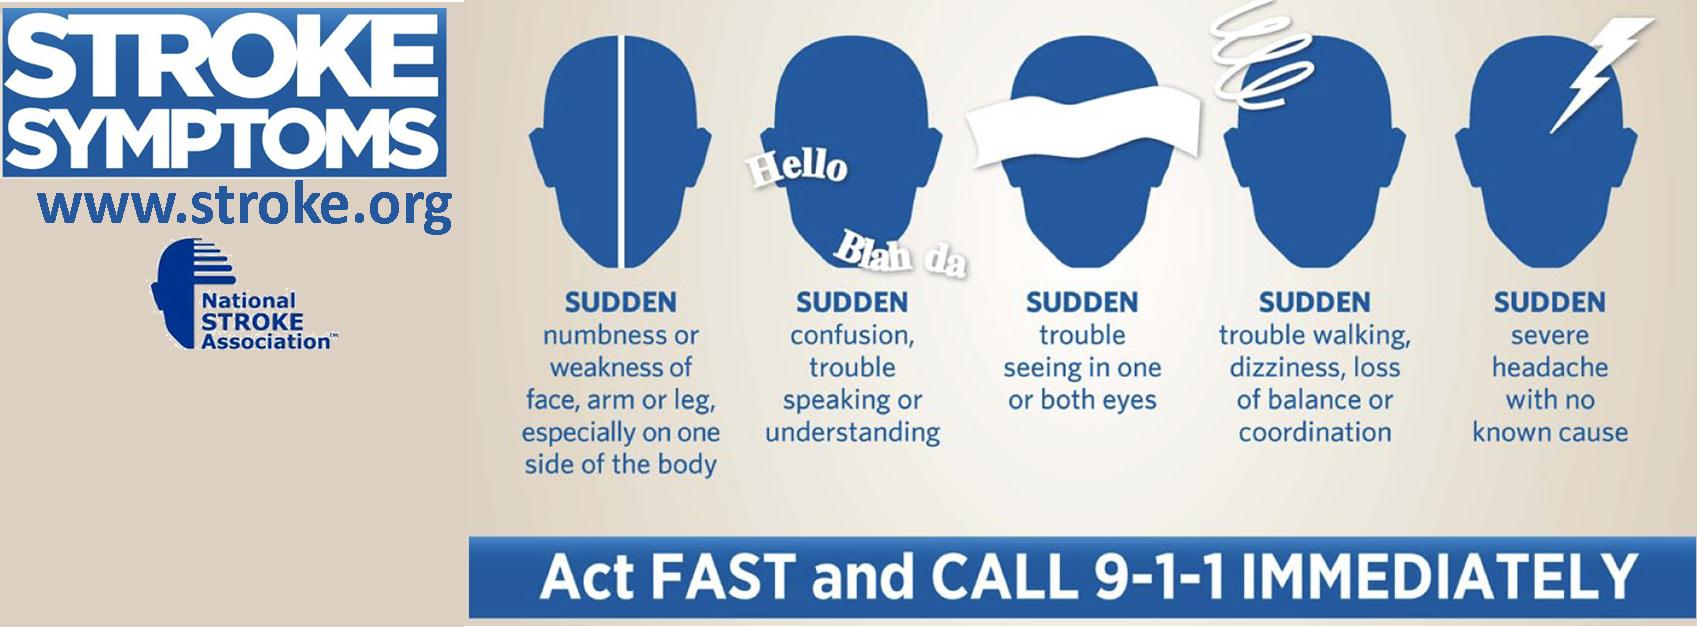 Stroke Awareness Month Symptoms - Act FAST and Call 911